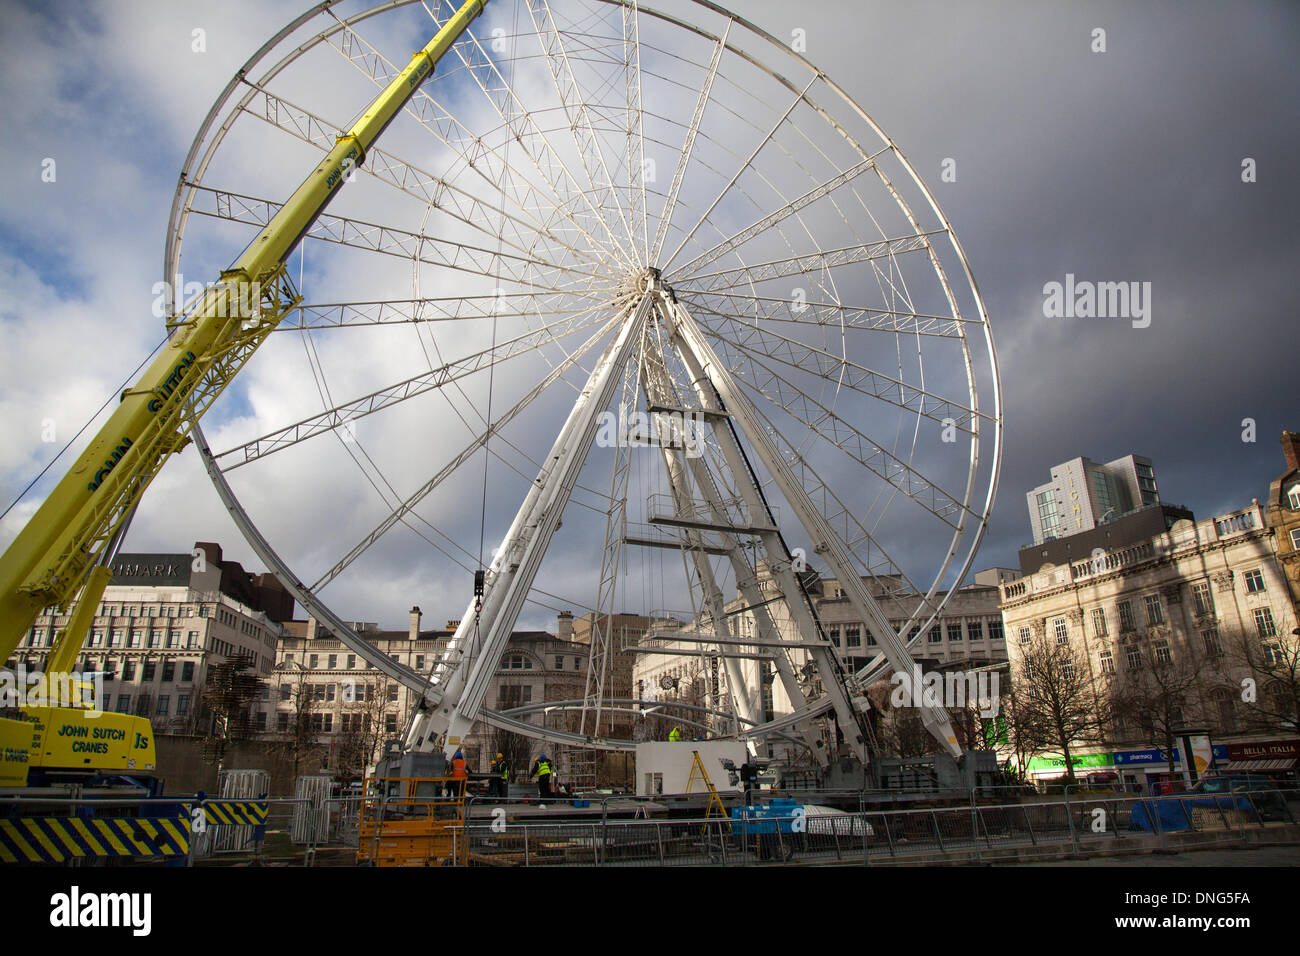 New Year Manchester, UK 27th December, 2013.     Manchester's New Year's Eve celebrations are poised to go off with a bang ... from Piccadilly Gardens, as the new big Ronald Bussink Professional Rides Ferris wheel takes centre stage. The 60m high ride – currently being built under difficult conditions– will officially open soon taking thrill-seekers up into the skies until 1am on January 1 2014.  It replaces the previous ride in Exchange Square, which was dismantled 18 months ago to make way for Olympic celebrations.  Conrad Elias/Alamy Live News Stock Photo